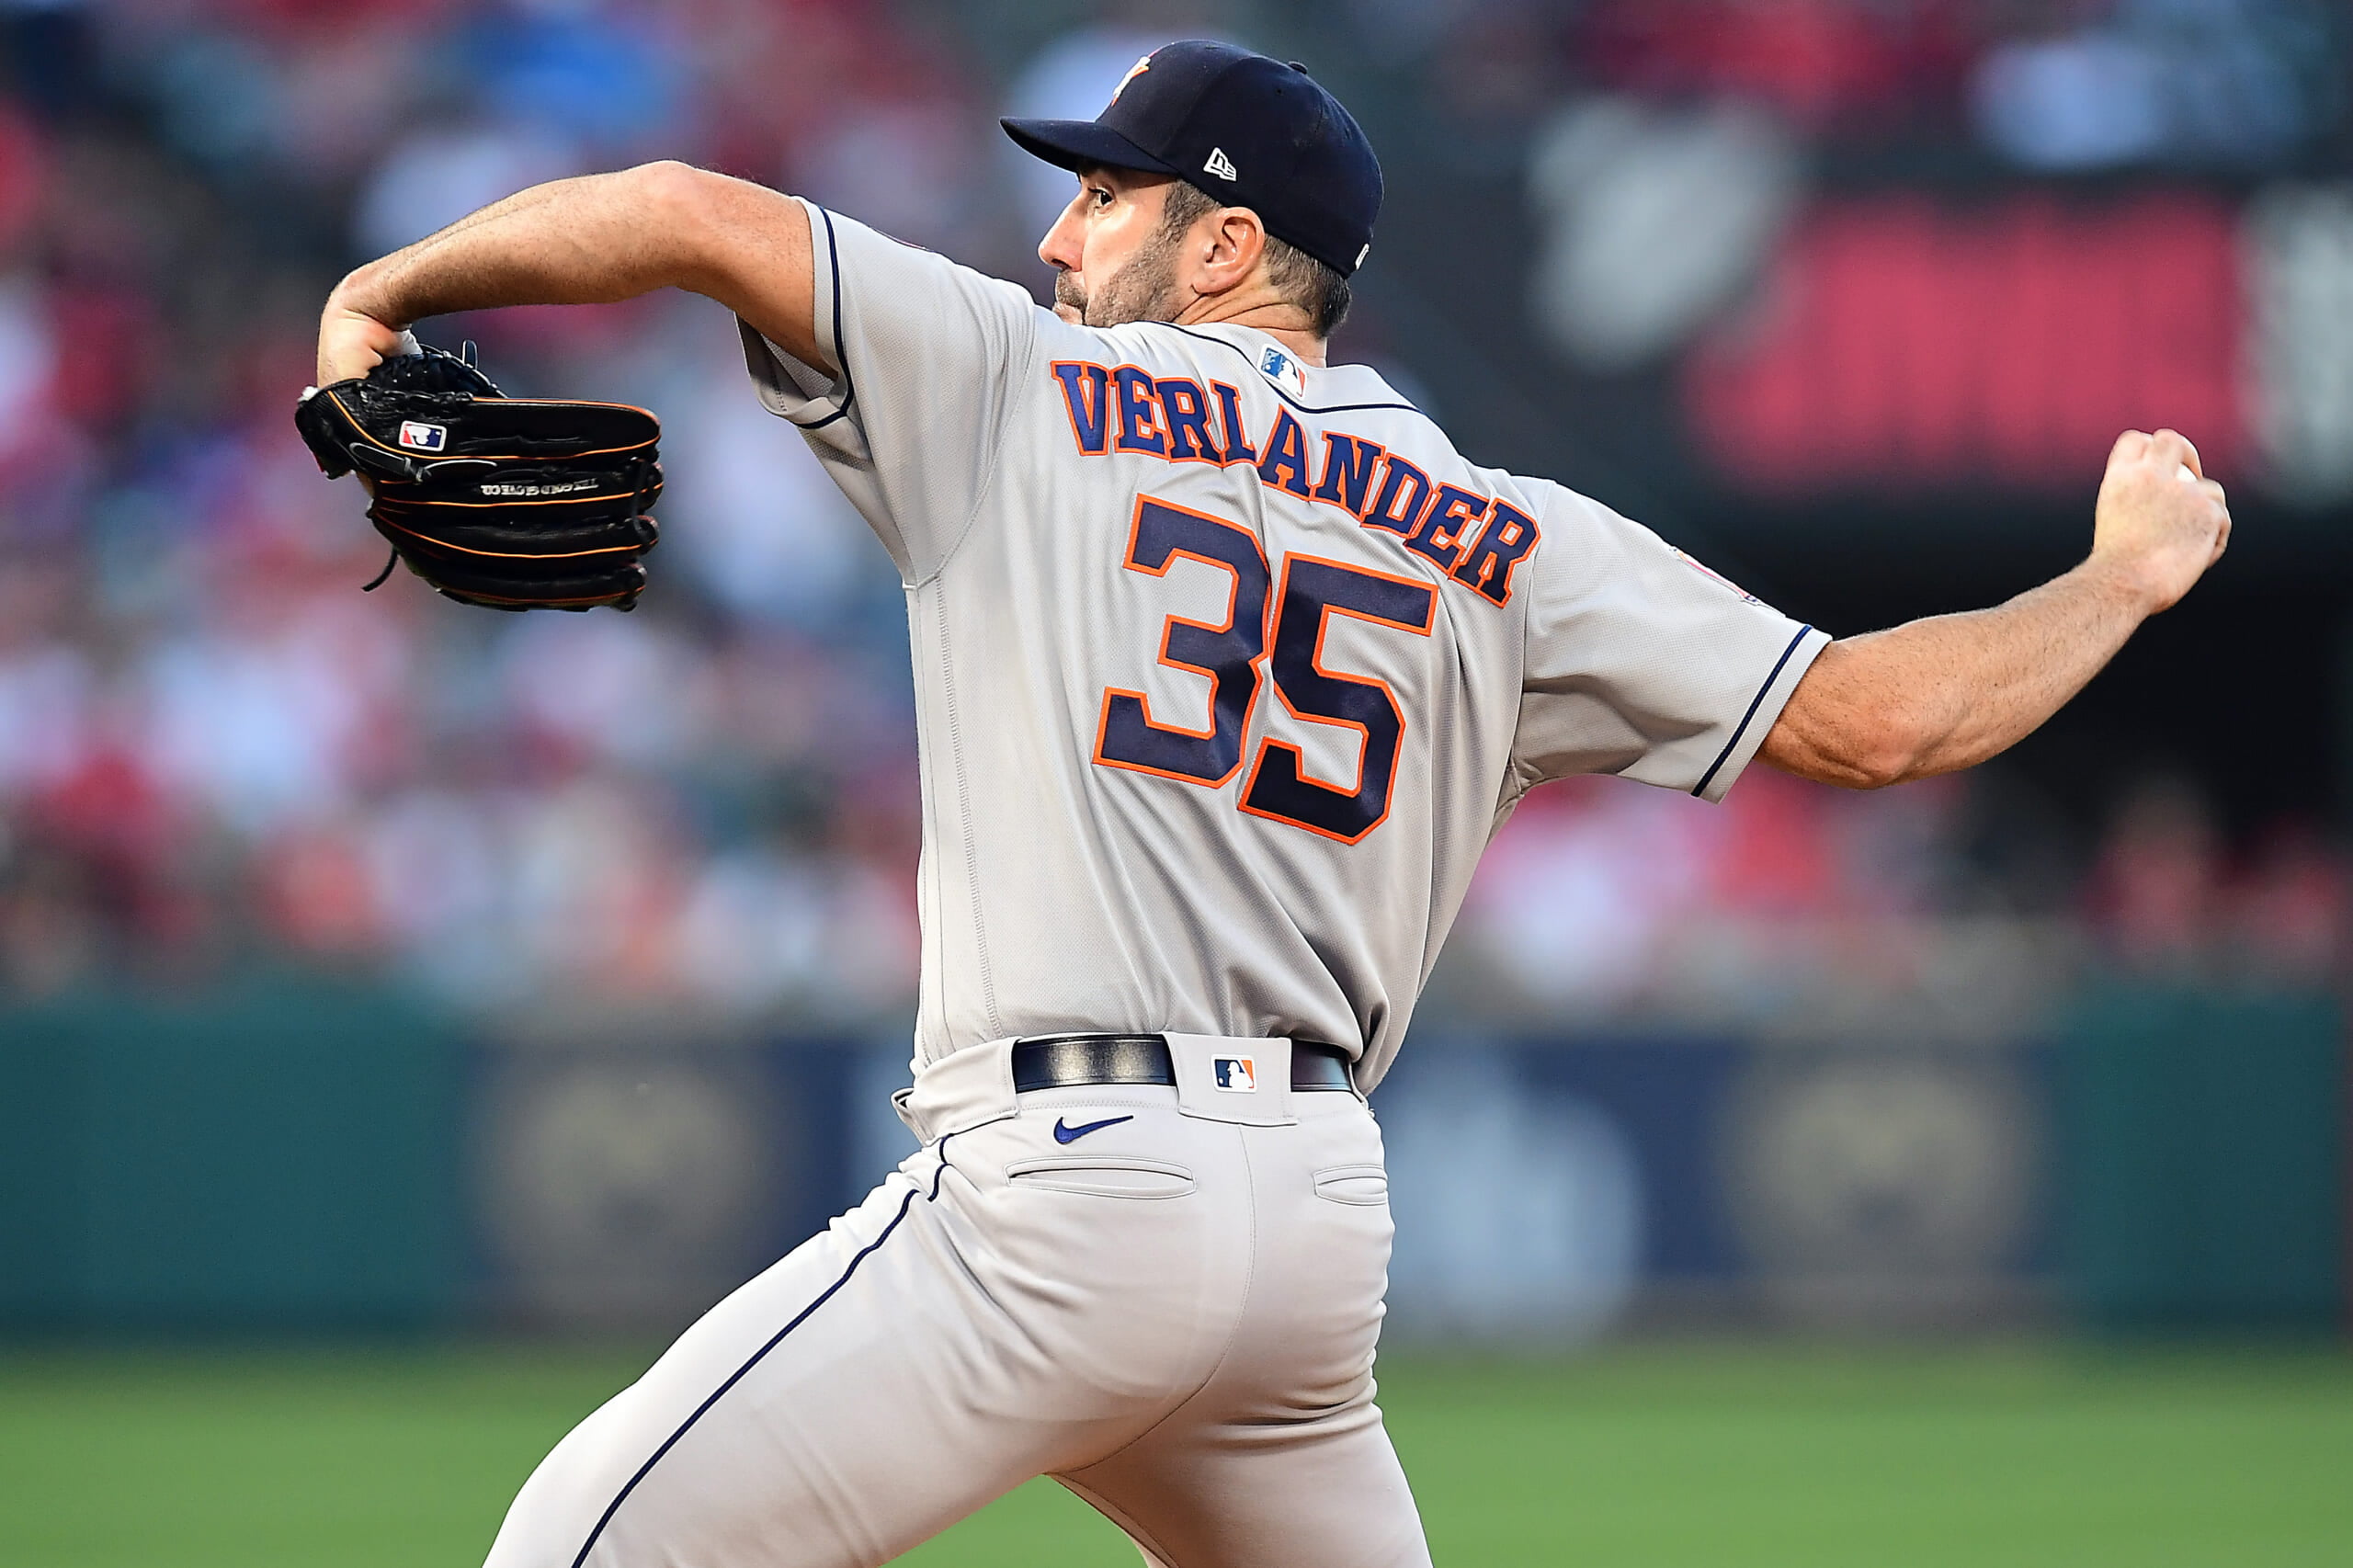 Houston Astros: A 2019 Justin Verlander stat is one of the best of all-time